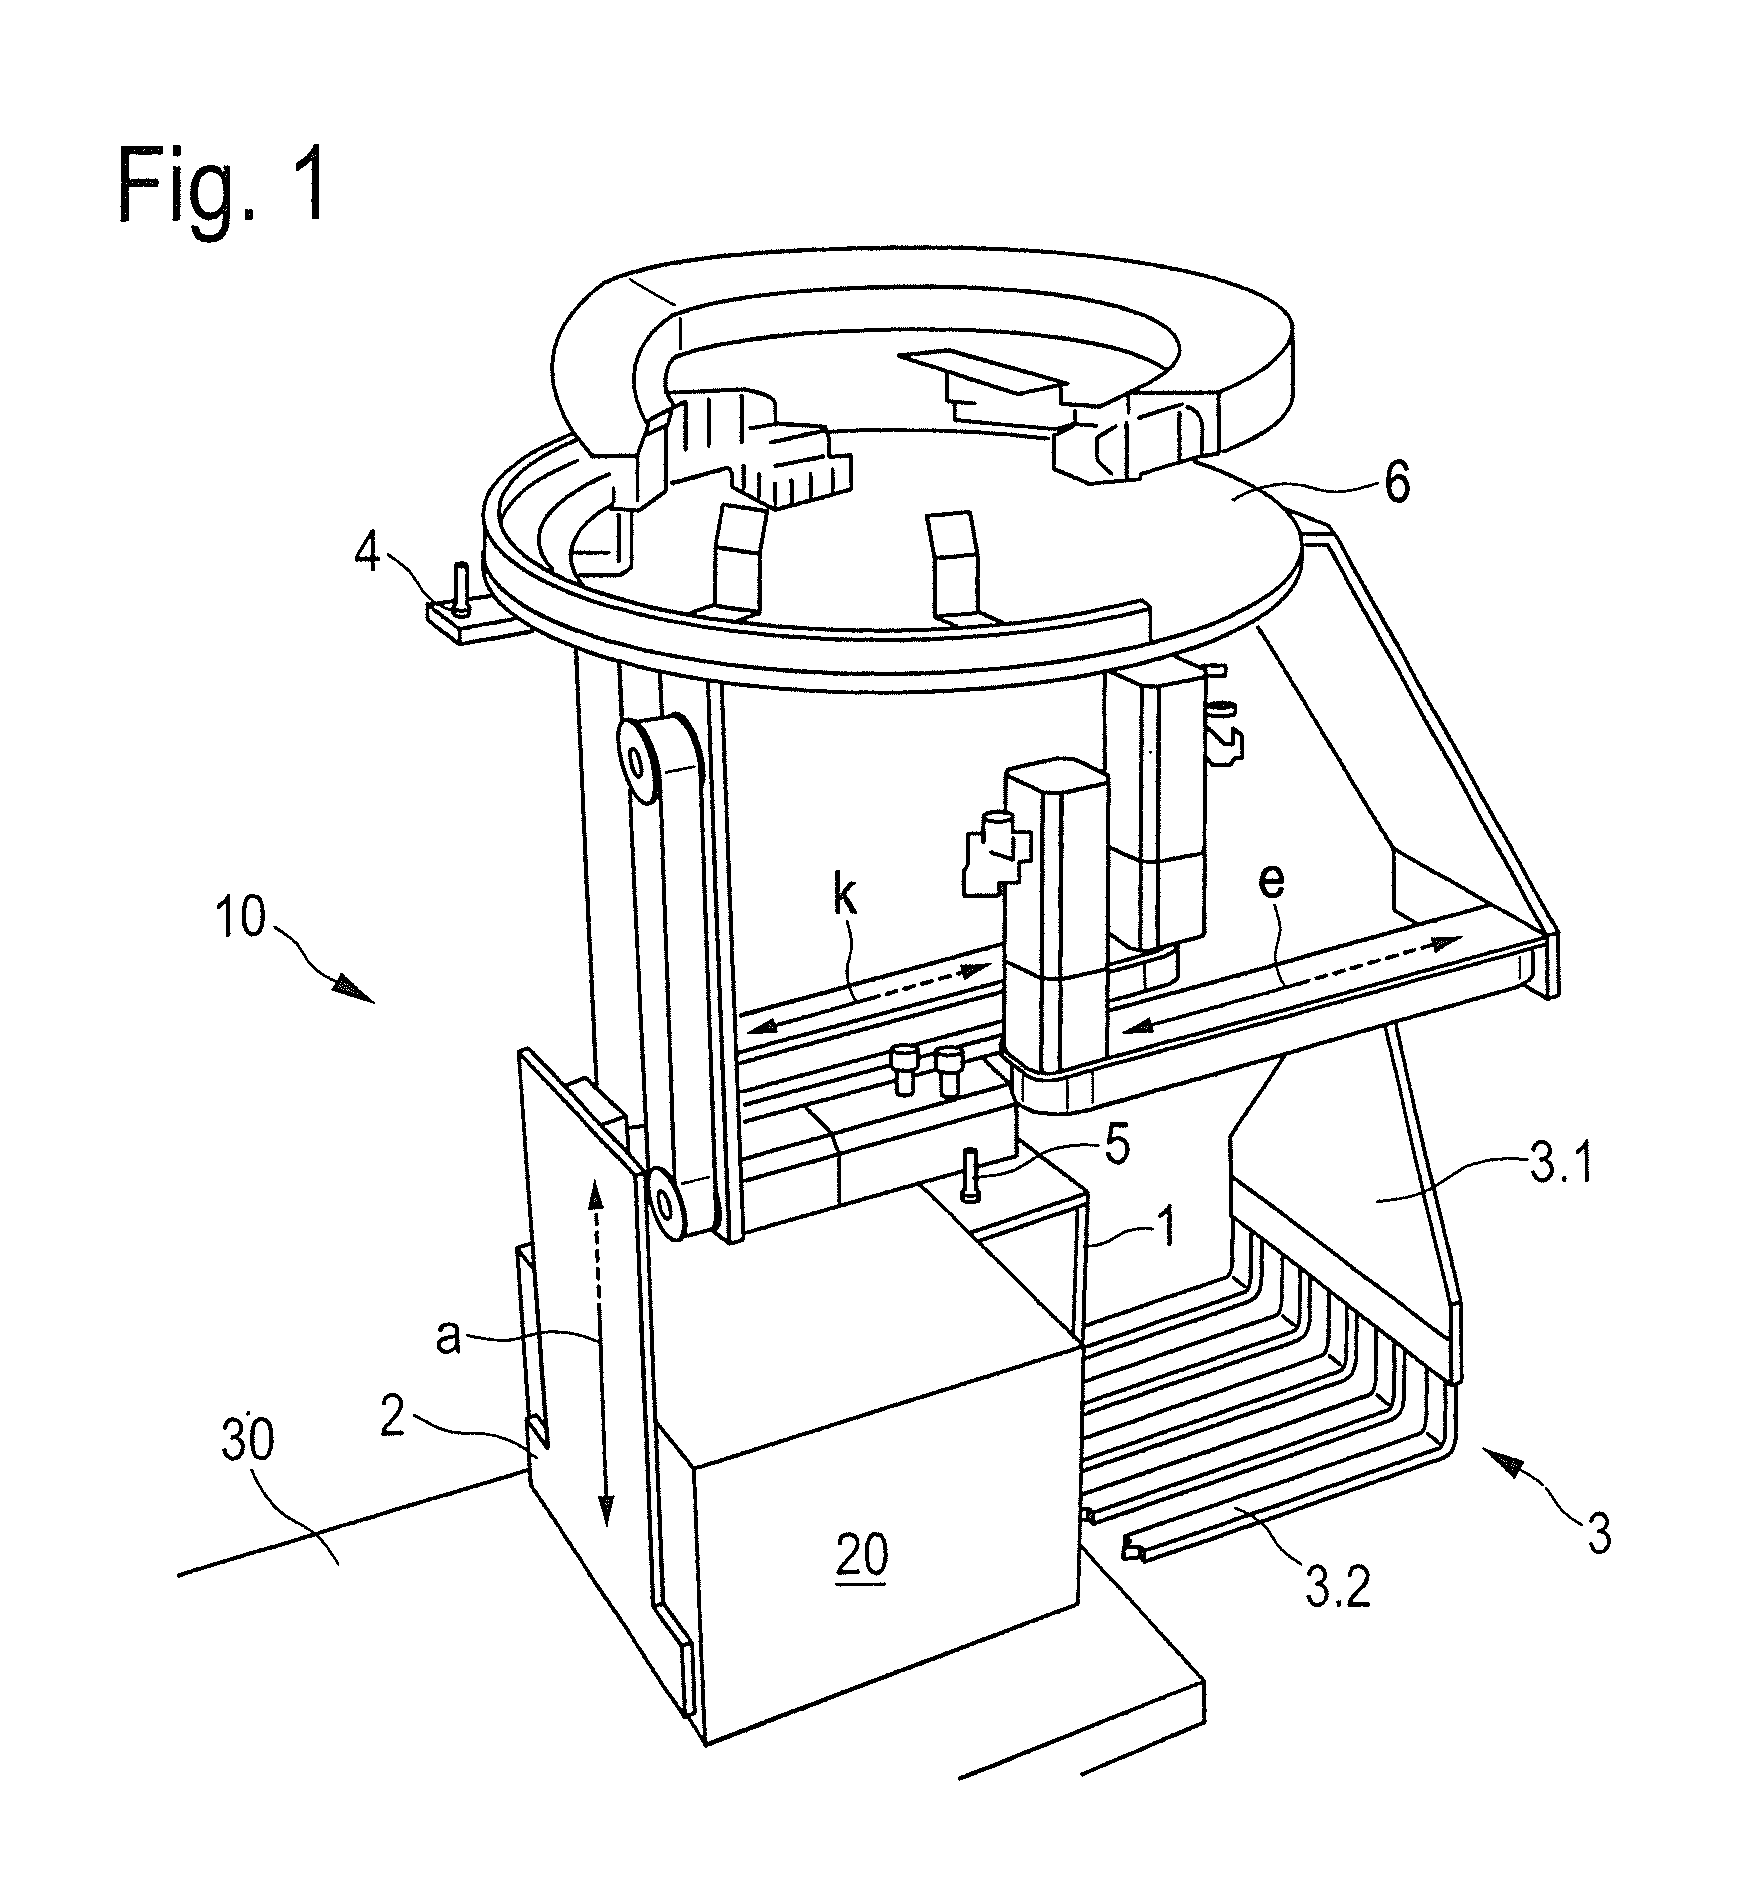 Gripper for an automated manipulator and method for operation of the gripper